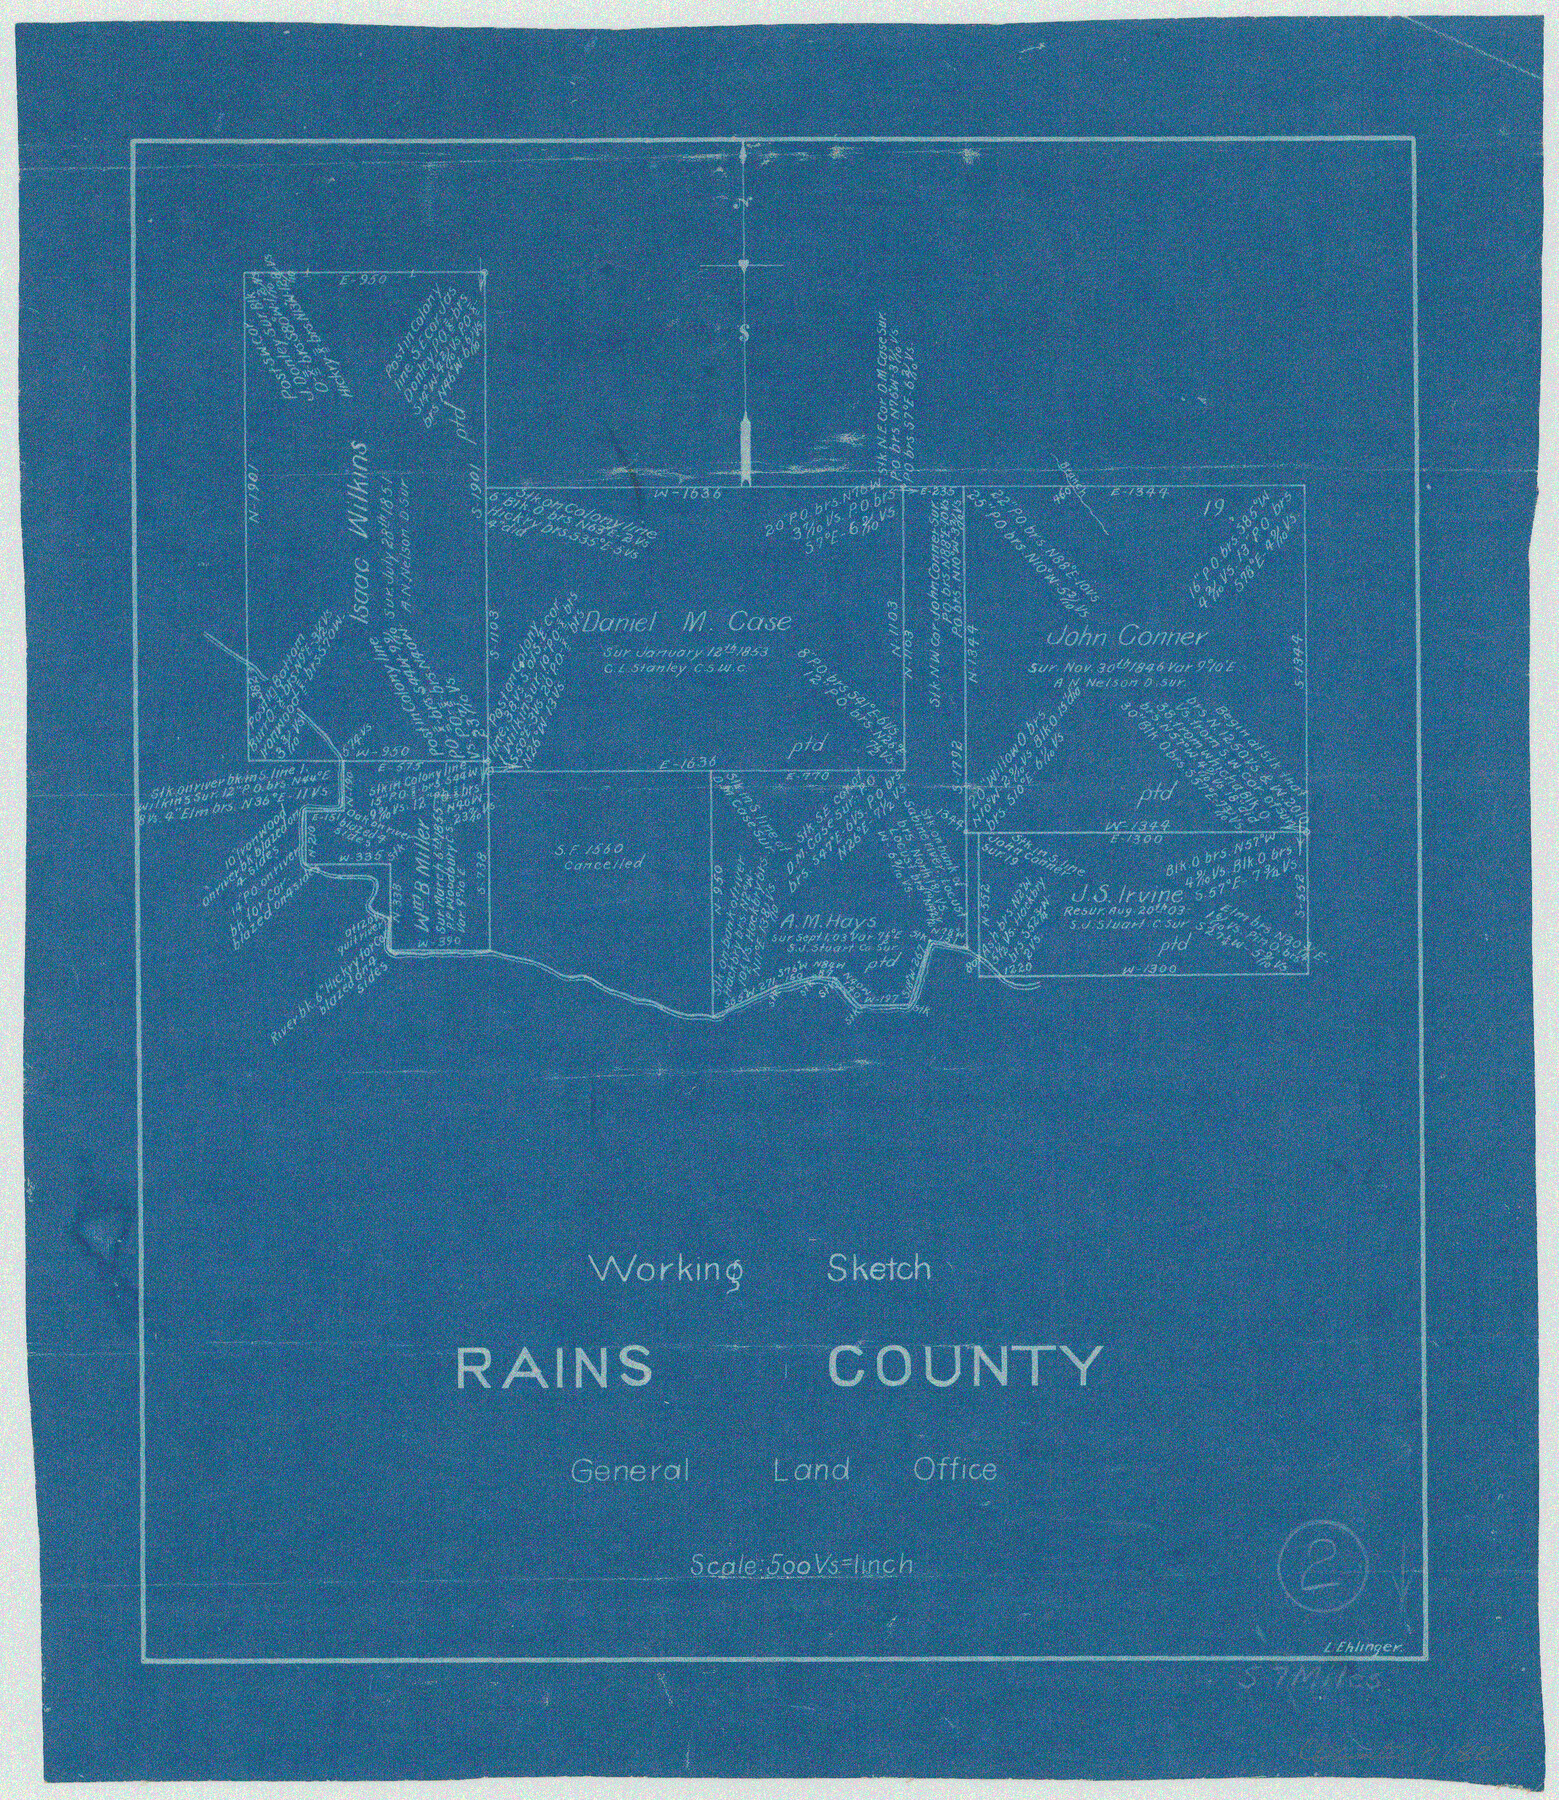 71828, Rains County Working Sketch 2, General Map Collection